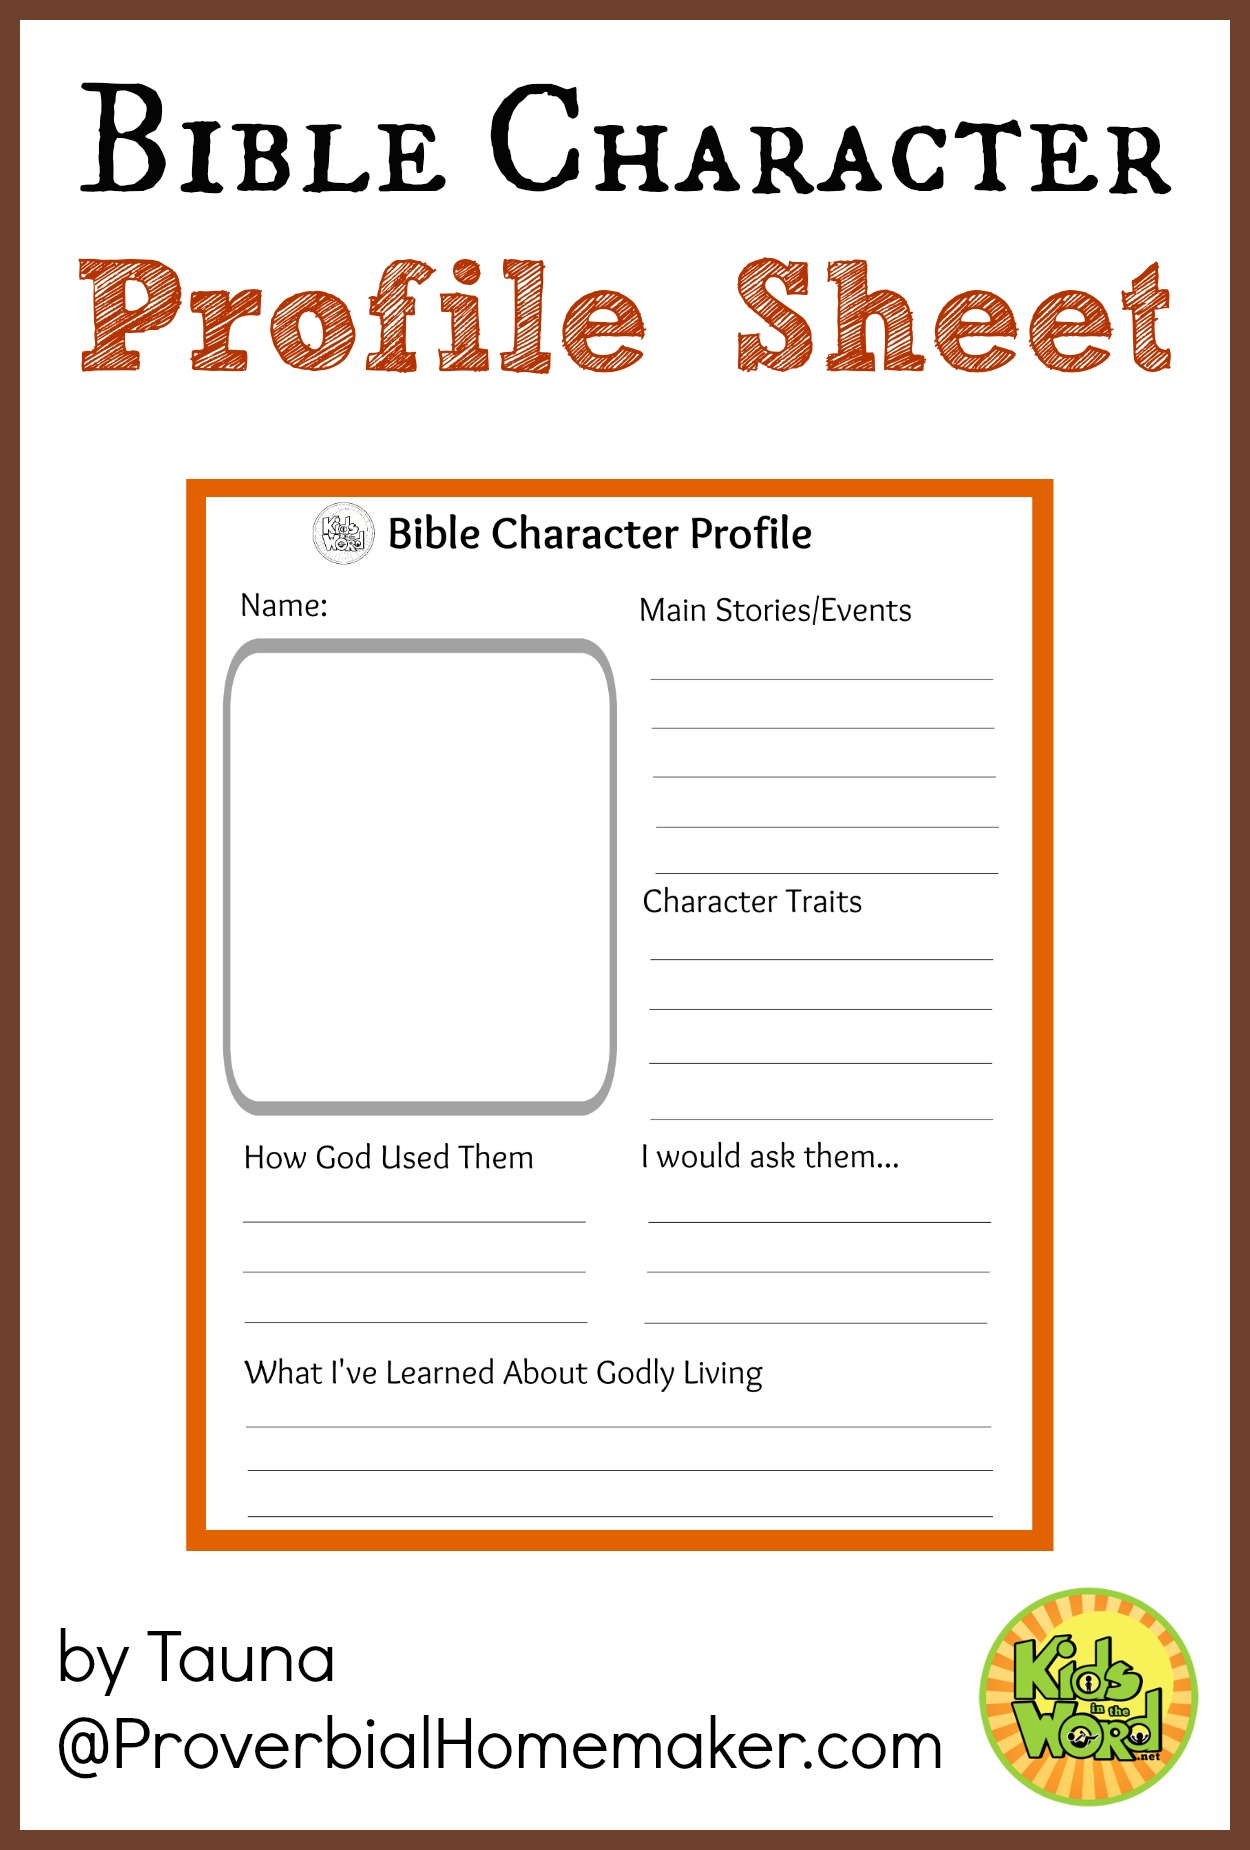 Study Bible characters with your kids using this profile sheet.